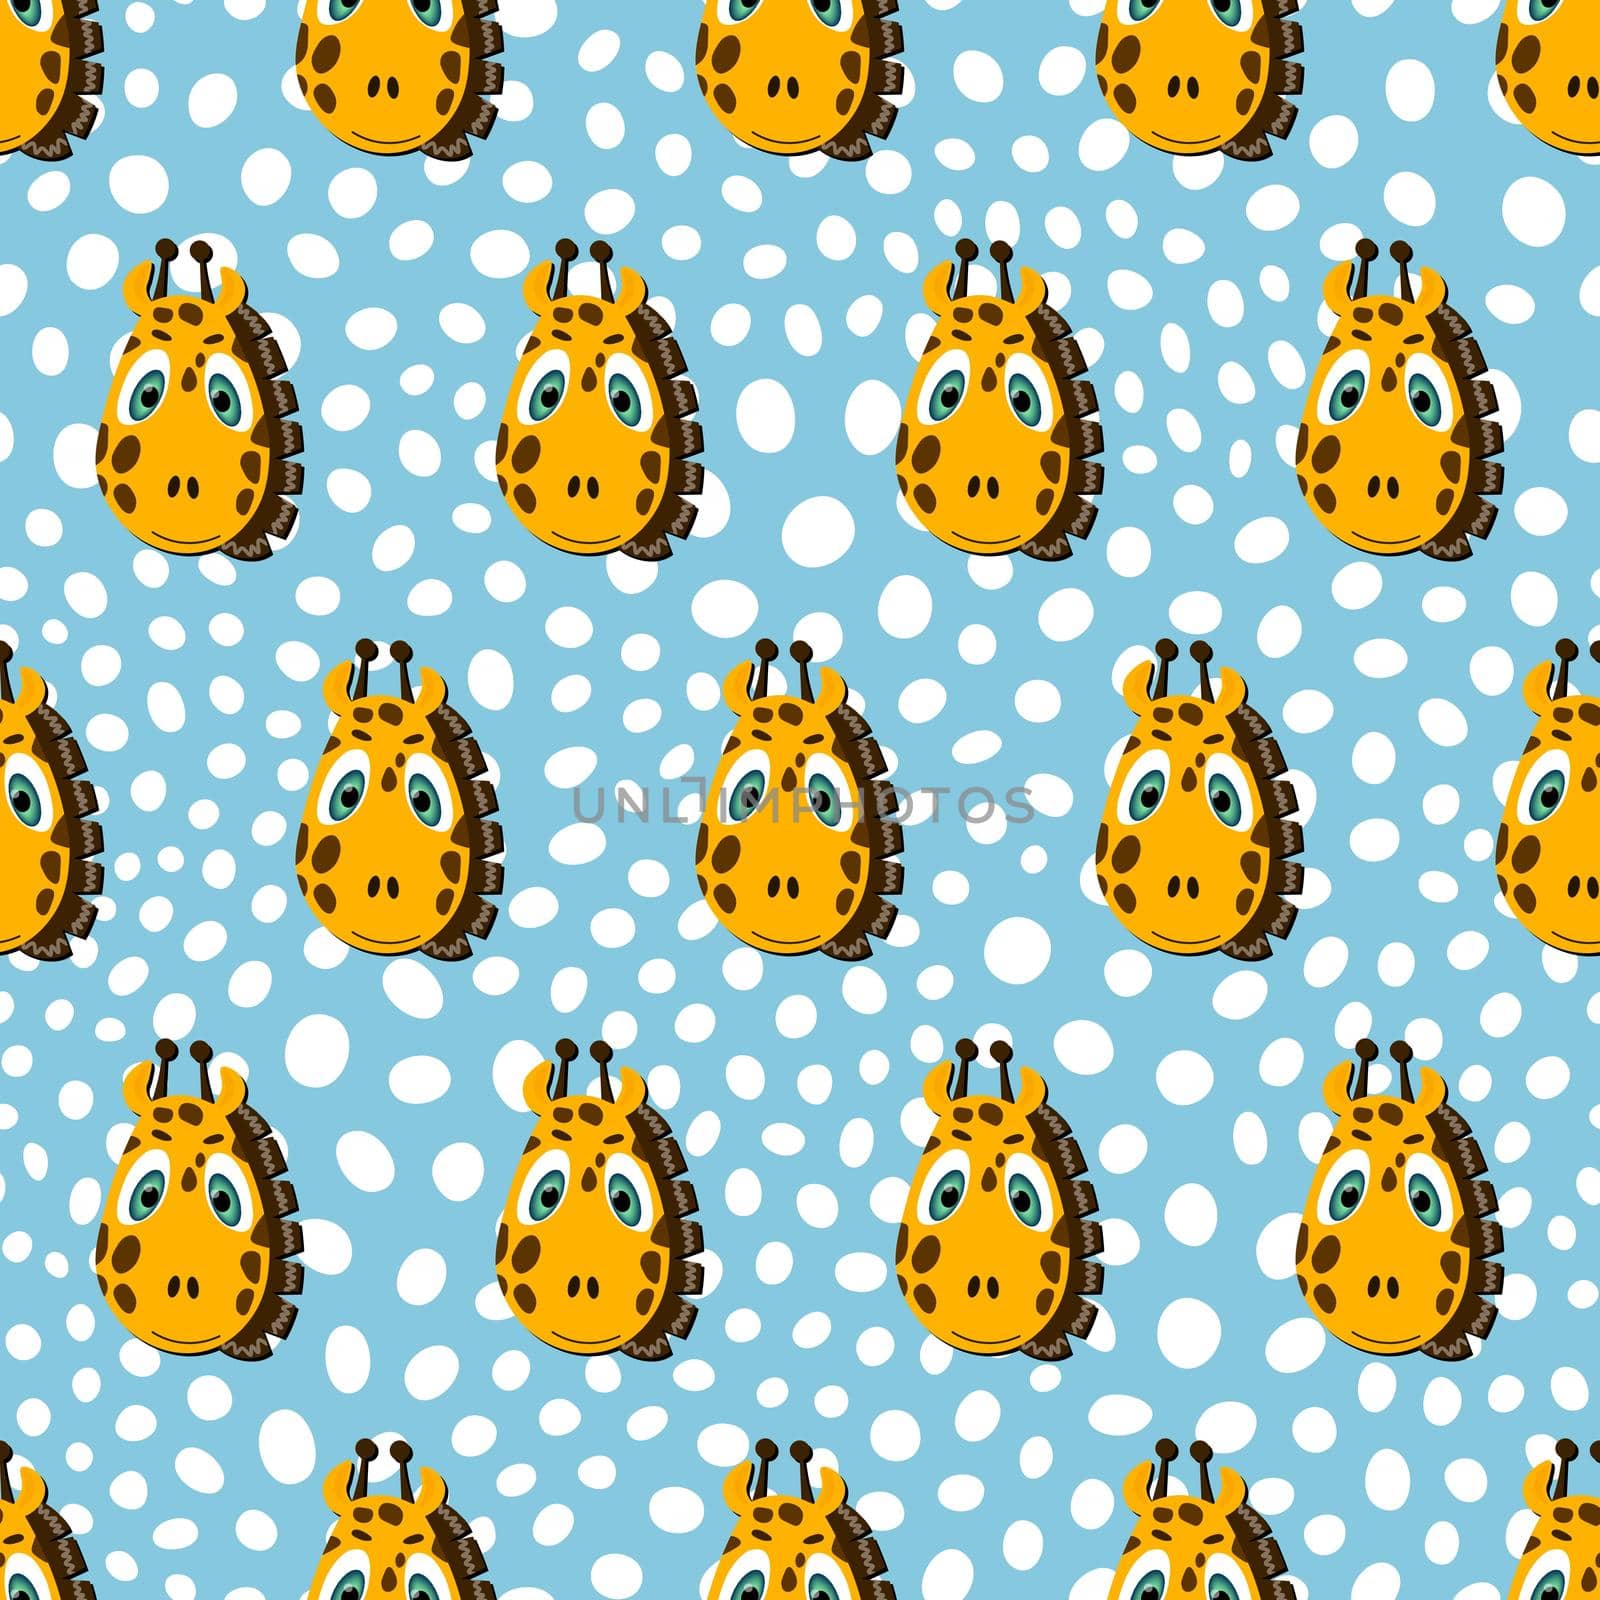 Vector flat animals colorful illustration for kids. Seamless pattern with cute giraffe face on blue polka dots background. Adorable cartoon character. Design for card, poster, fabric, textile